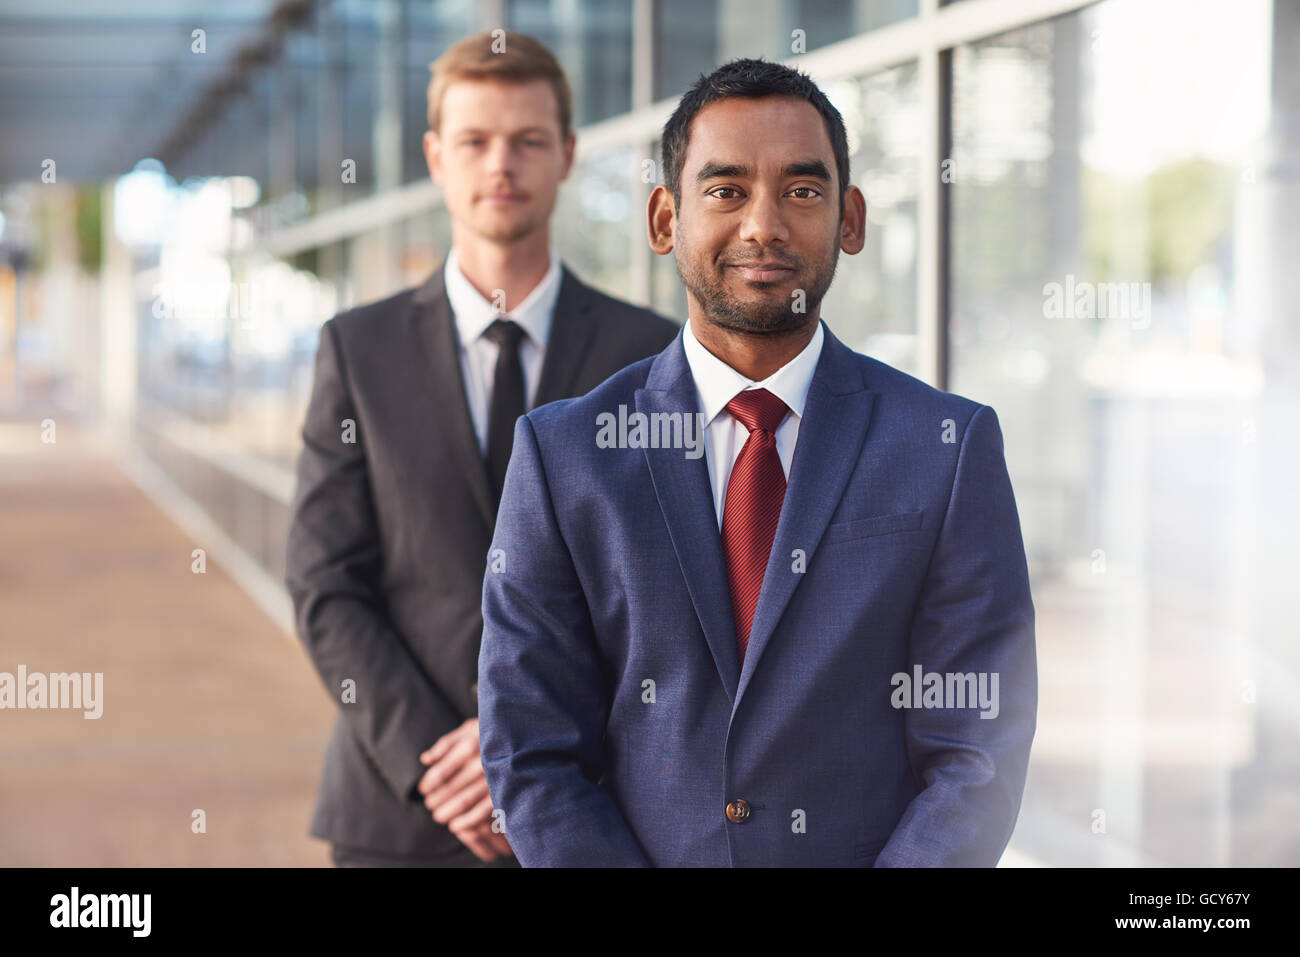 Partners in the corporate business world Stock Photo